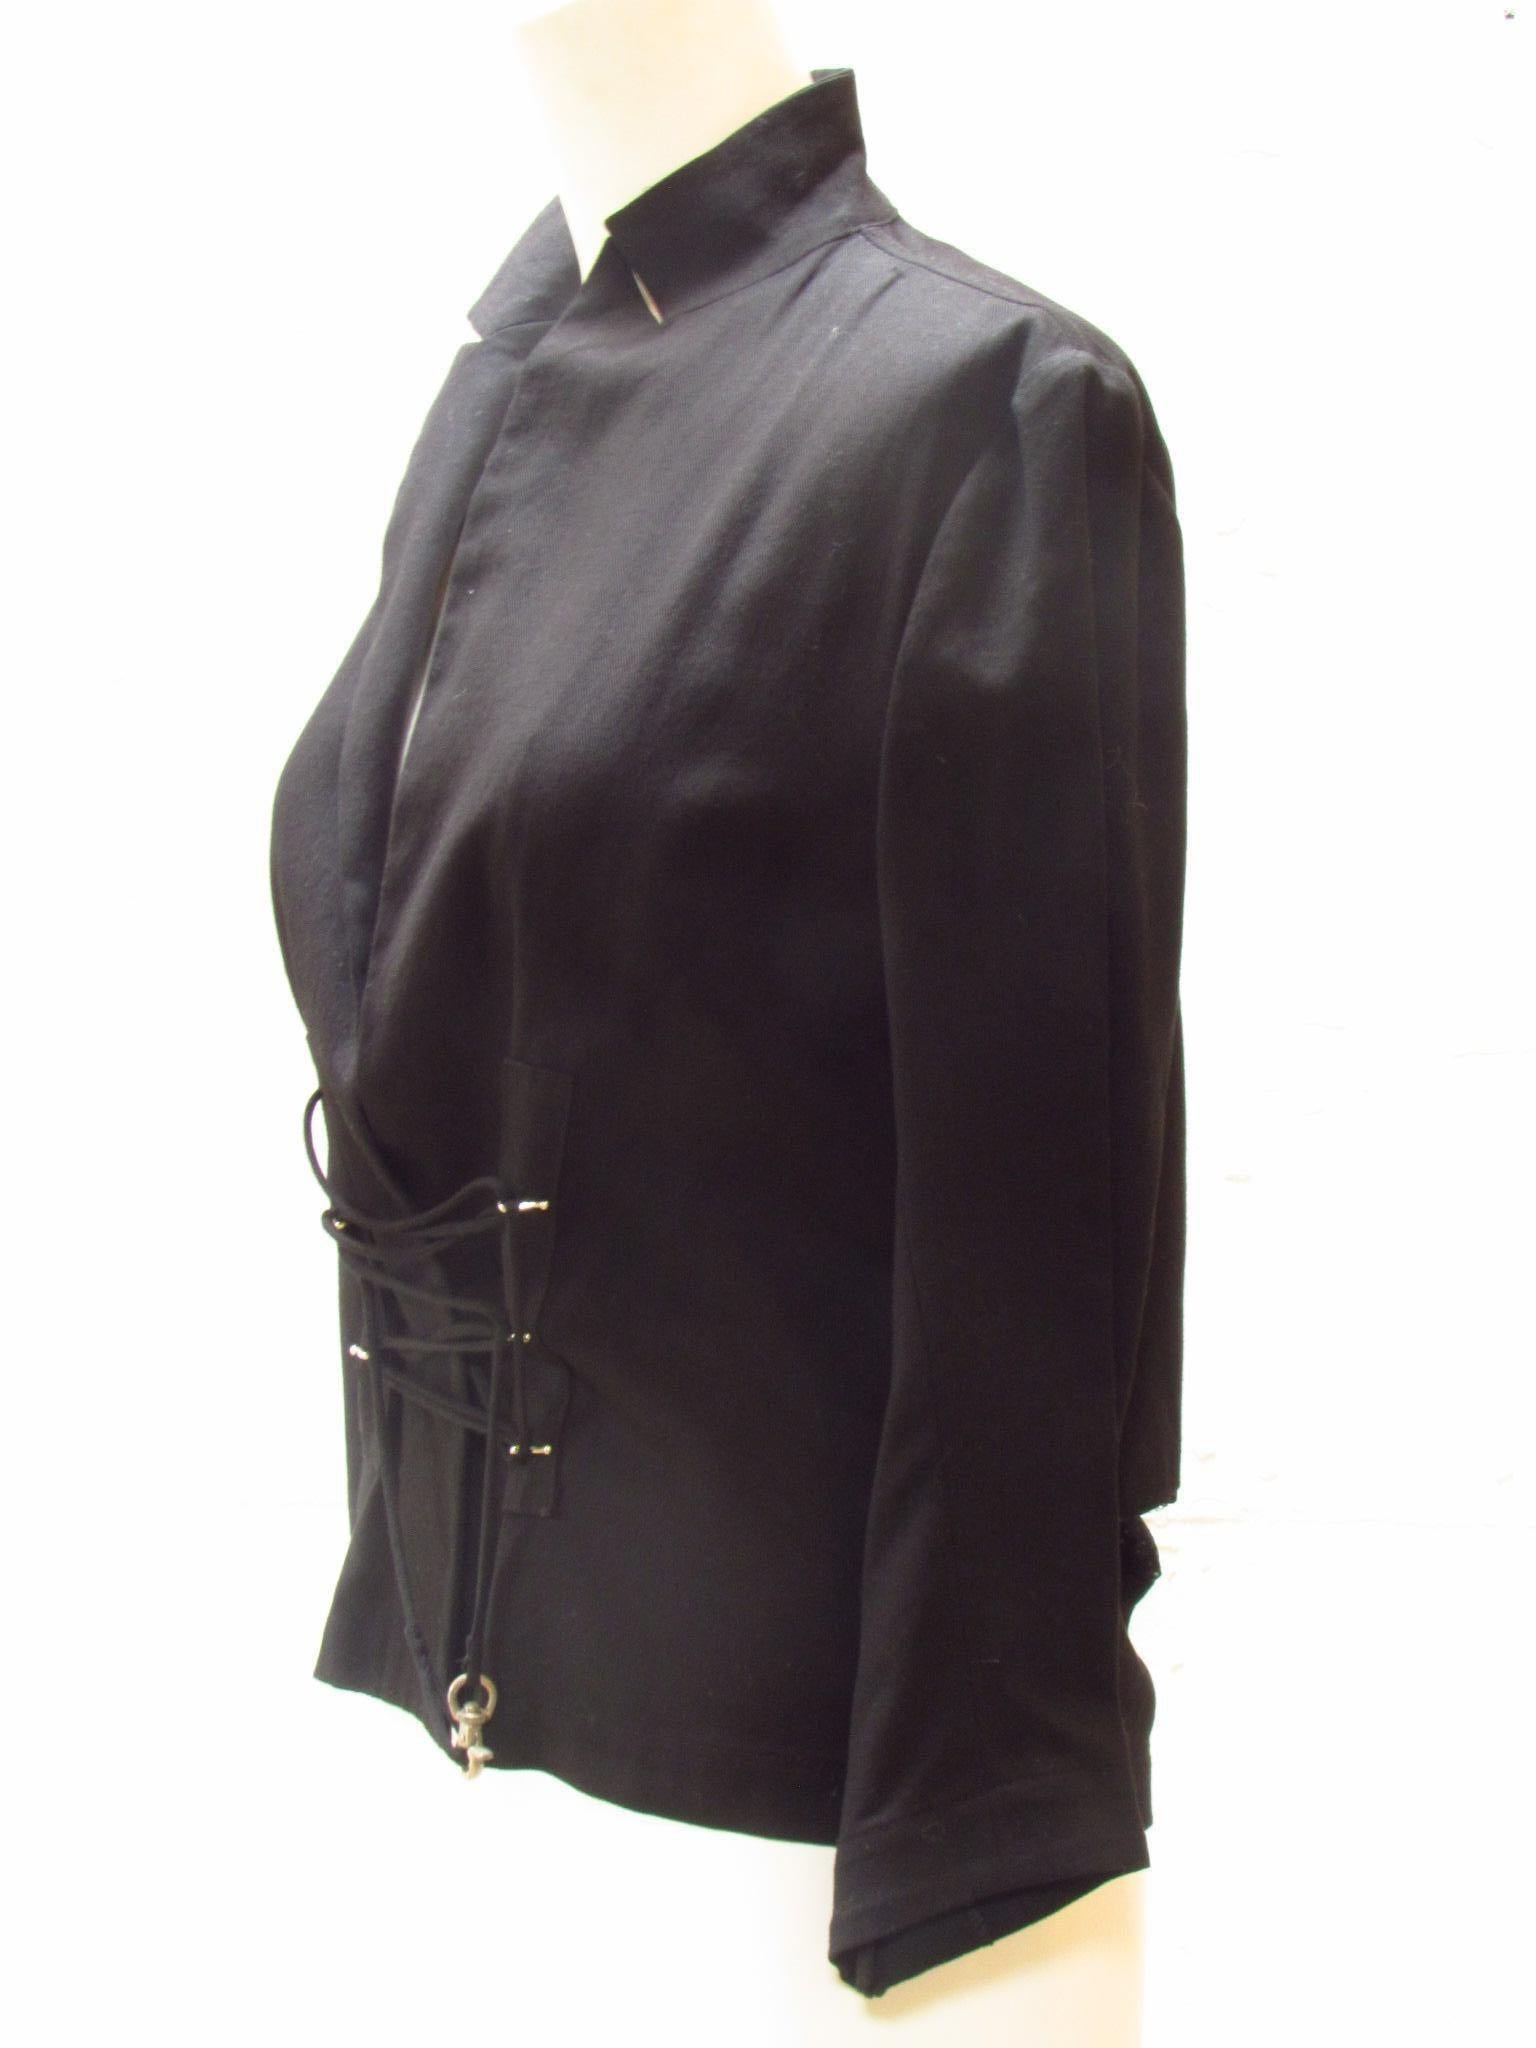 Be a trailblazer in this strapped up black blazer by Yohji Yamamoto. Fabric straps are laced through metal clasps in front and wrap around to tie. Lace cut out panel on back tail and buttoned cuffs finish this magnificent cotton jacket. 